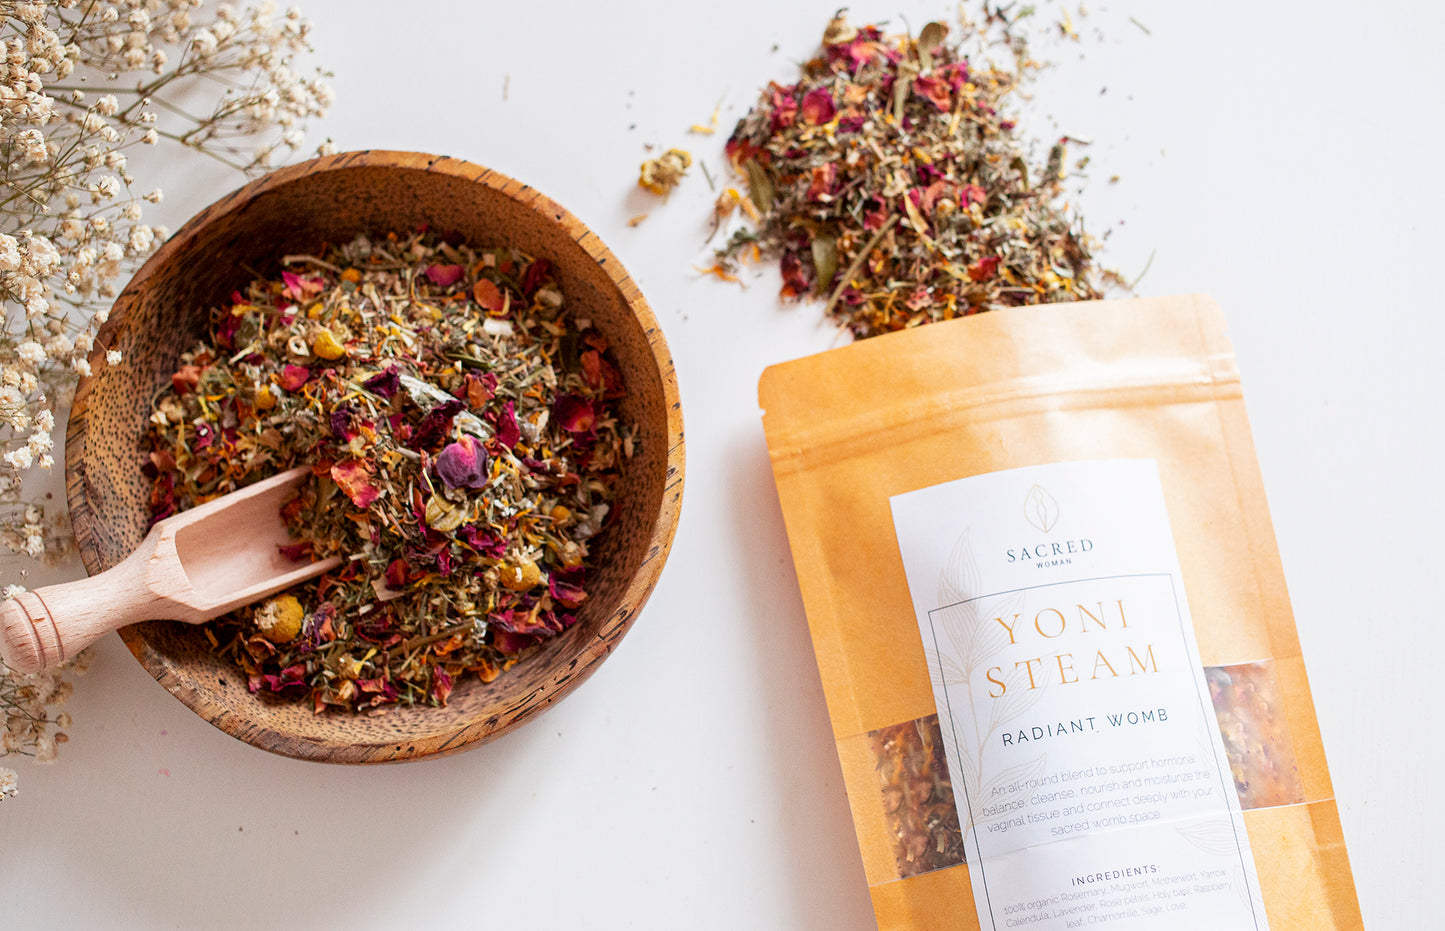 Radiant Womb - Cleansing Yoni Steaming Blend